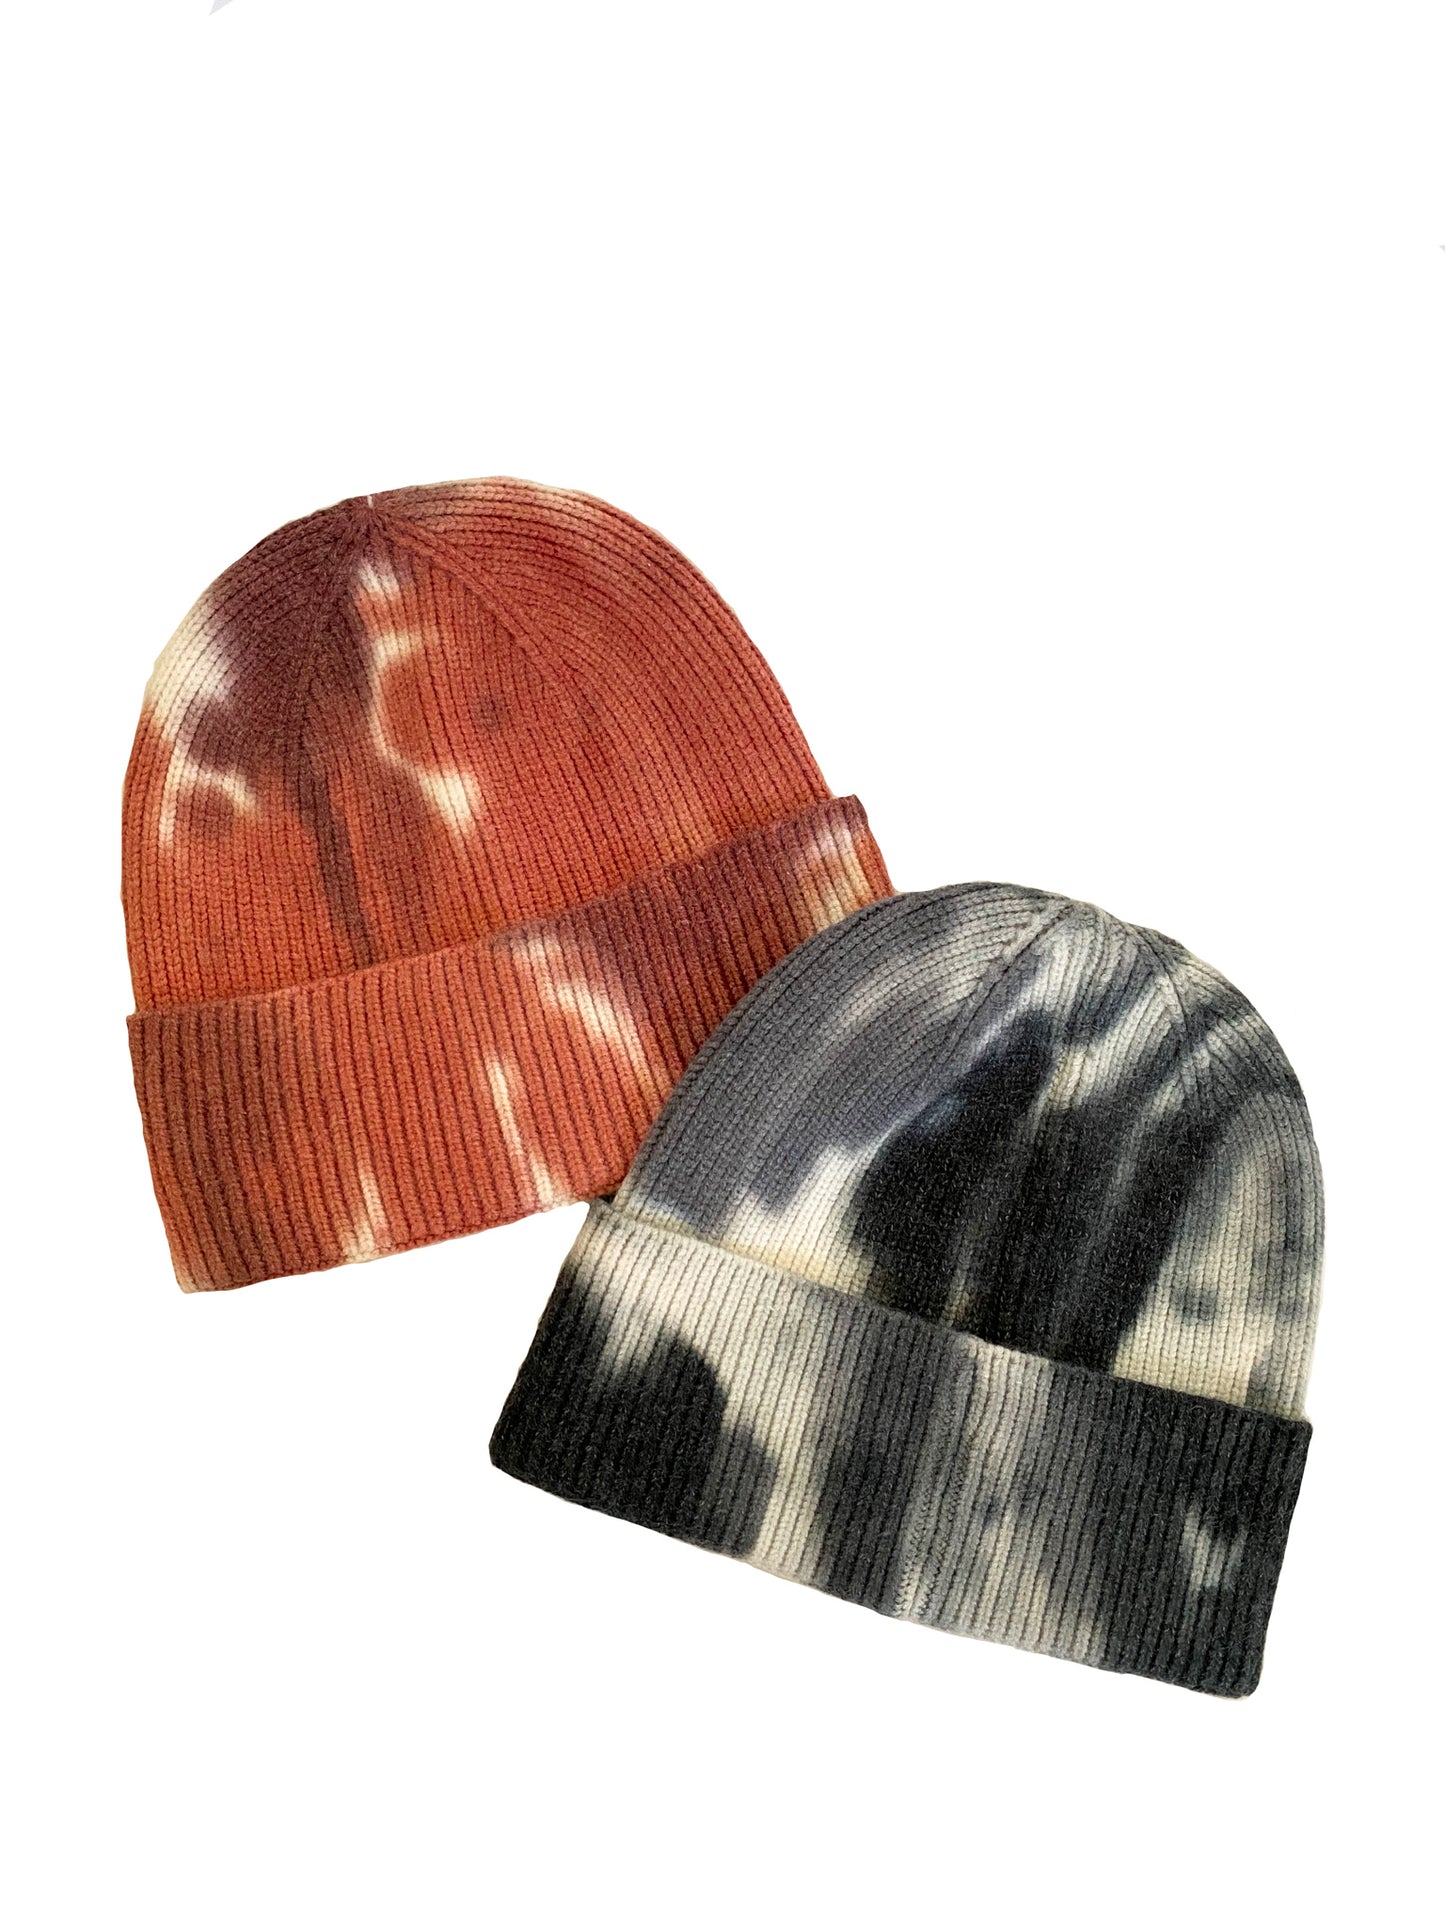 Women's Tie Dye Beanies. Available in Pink and Gray. One Size Fits All. 52% Viscose, 28% Polyester, 20% Nylon. Perfect for the winter and fall time. Super cozy and warm.